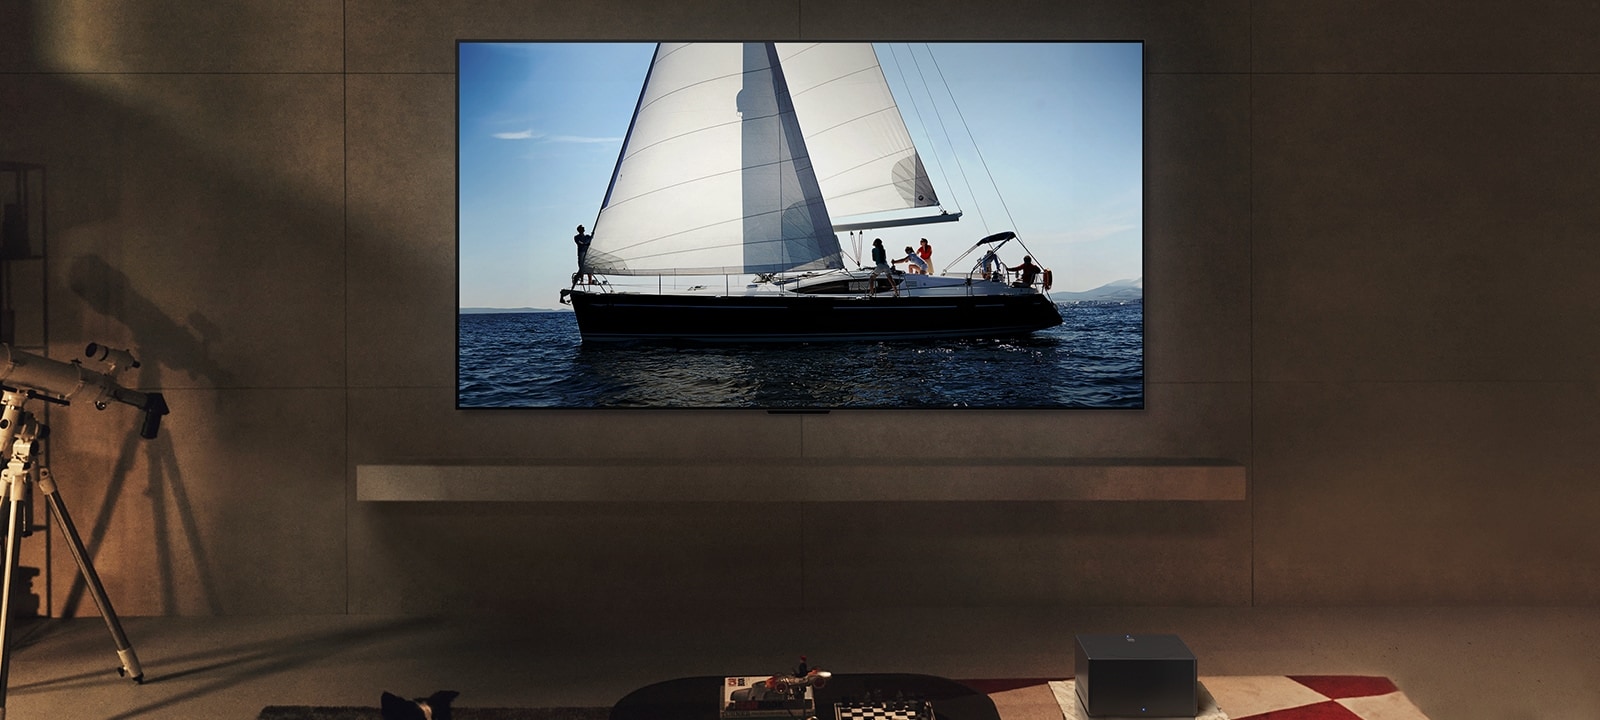 LG OLED evo M4 and LG Soundbar in a modern living space in nighttime. The screen image of a sailboat in the ocean is displayed with the ideal brightness levels.